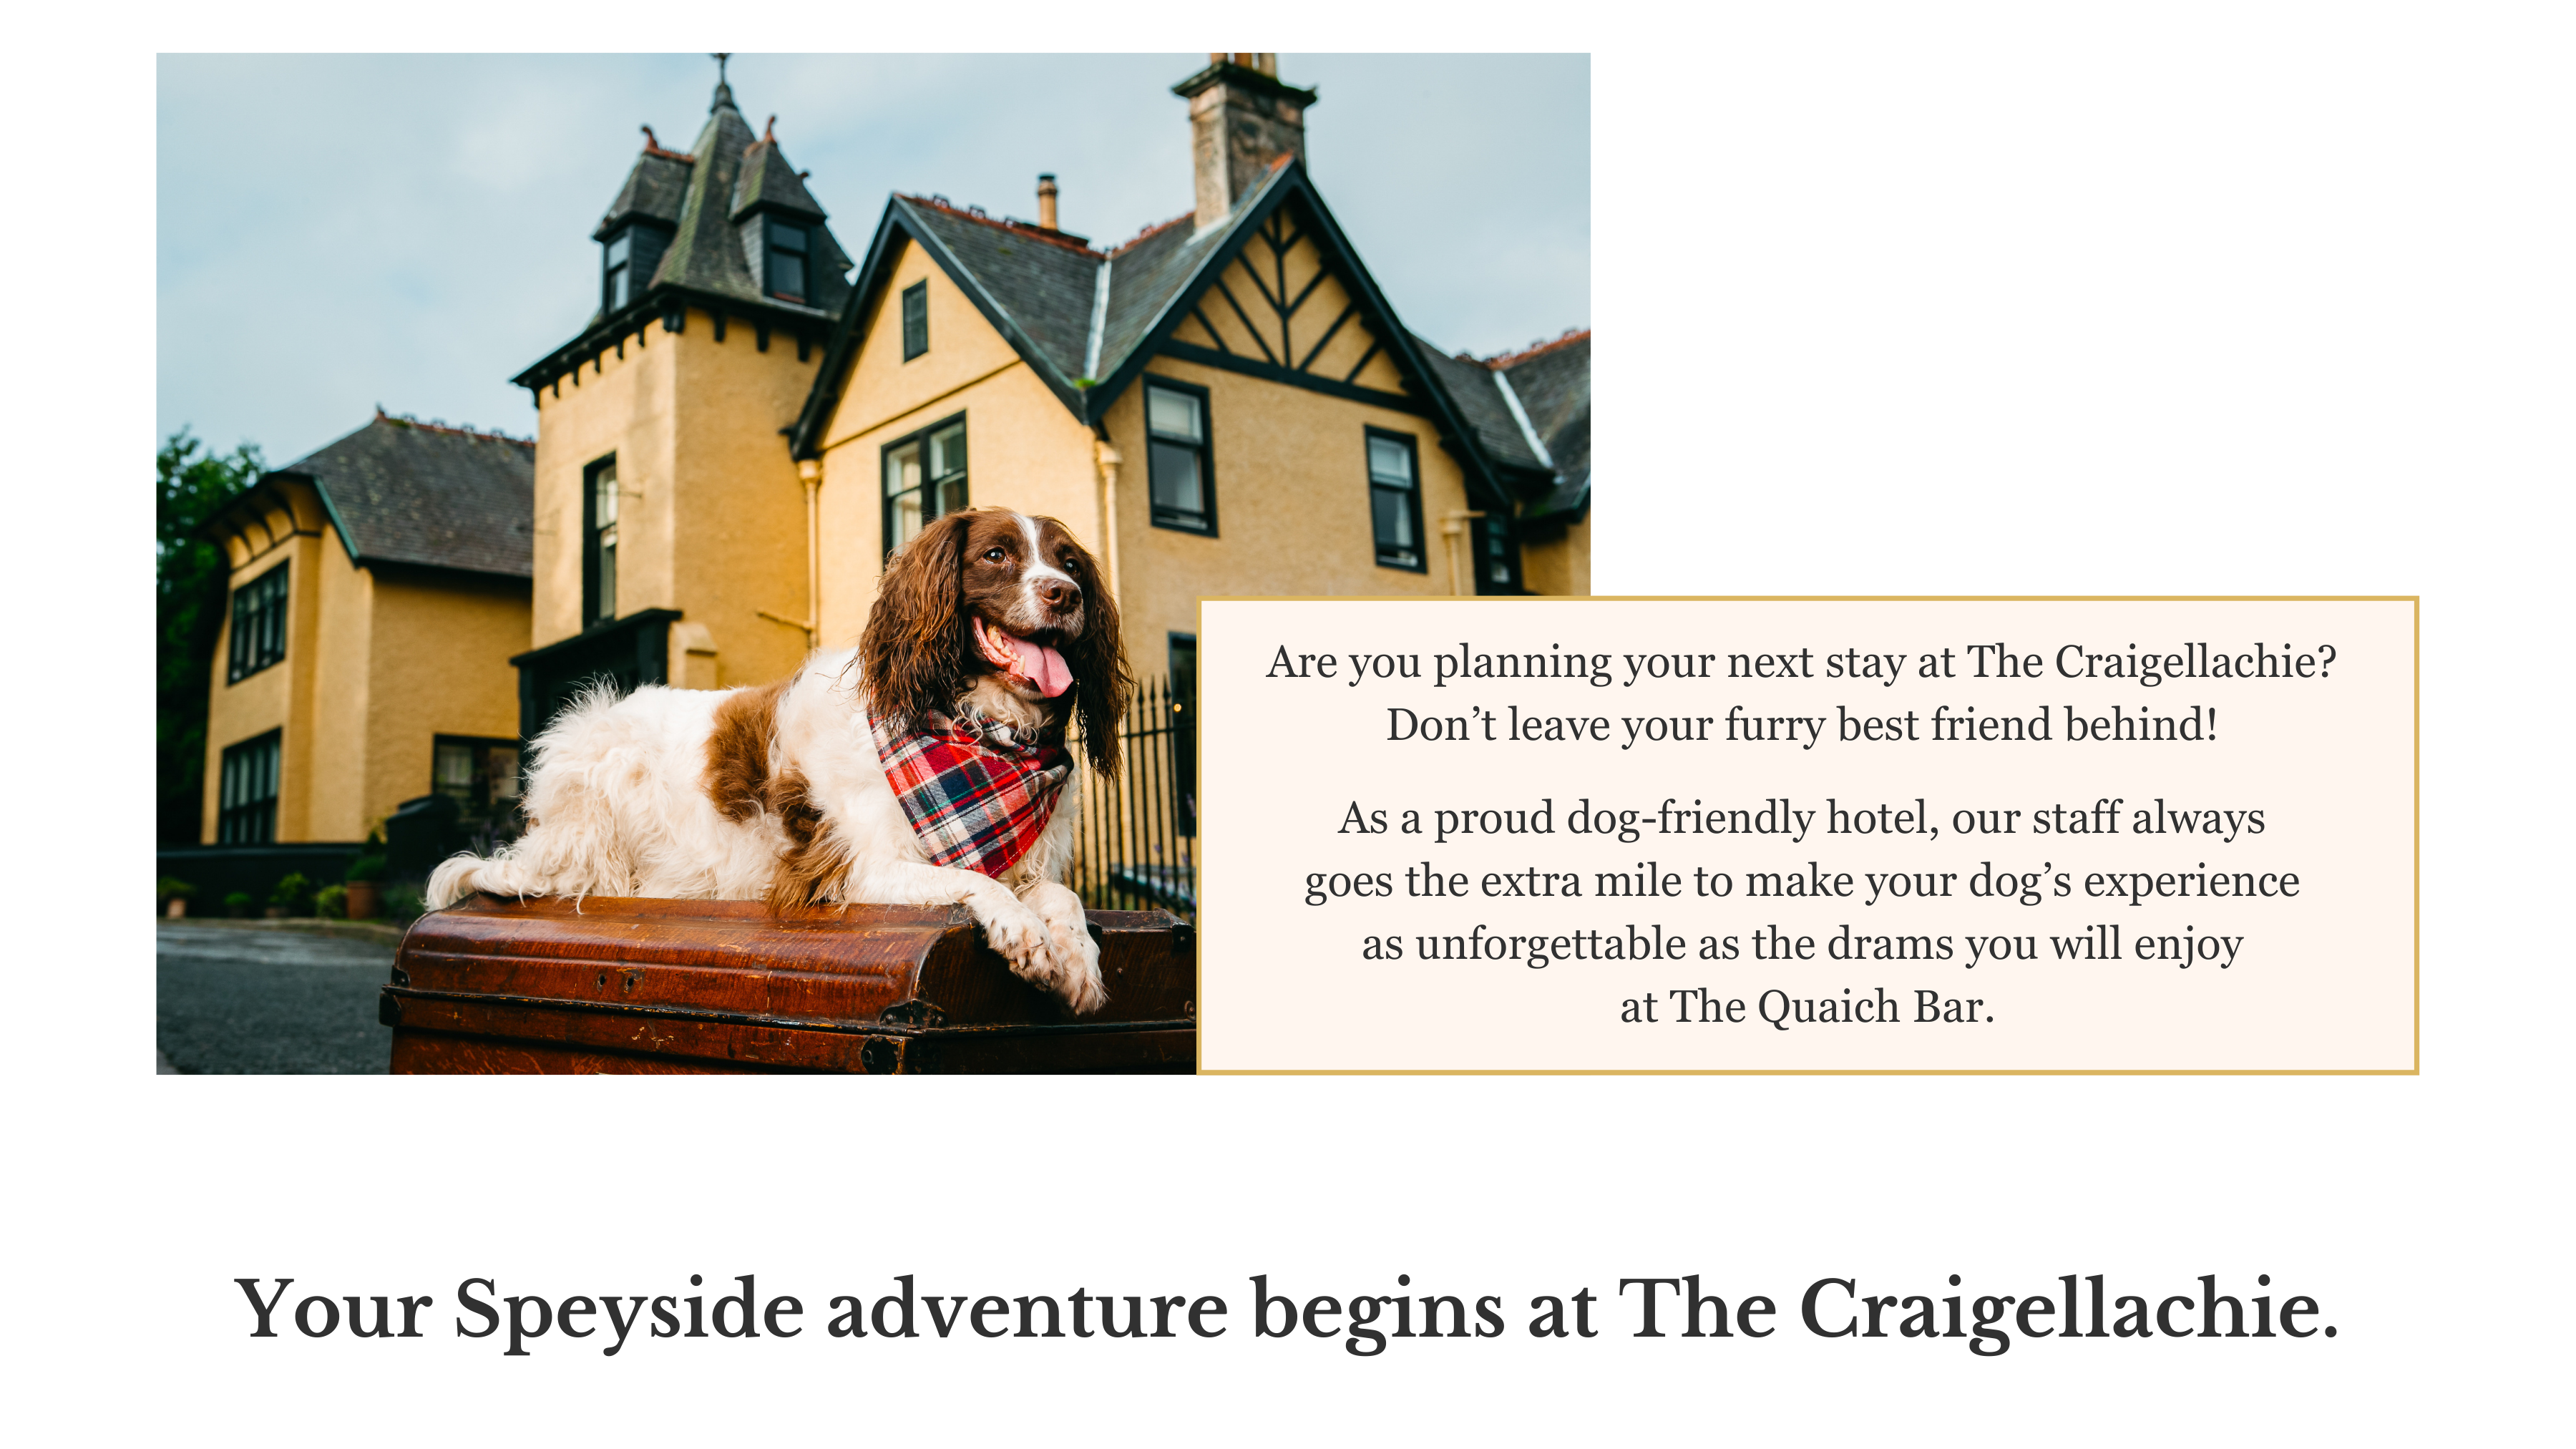 Are you planning your next stay at The Craigellachie? Don’t leave your furry best friend behind! As a proud dog-friendly hotel, our staff always goes the extra mile to make your dogs feel at home. The Craigellachie Bridge beach and the Speyside Way are just a two-minute walk away, offering the perfect backdrop to make your dog’s adventure as unforgettable as the finest drams you will enjoy at The Quaich Bar.